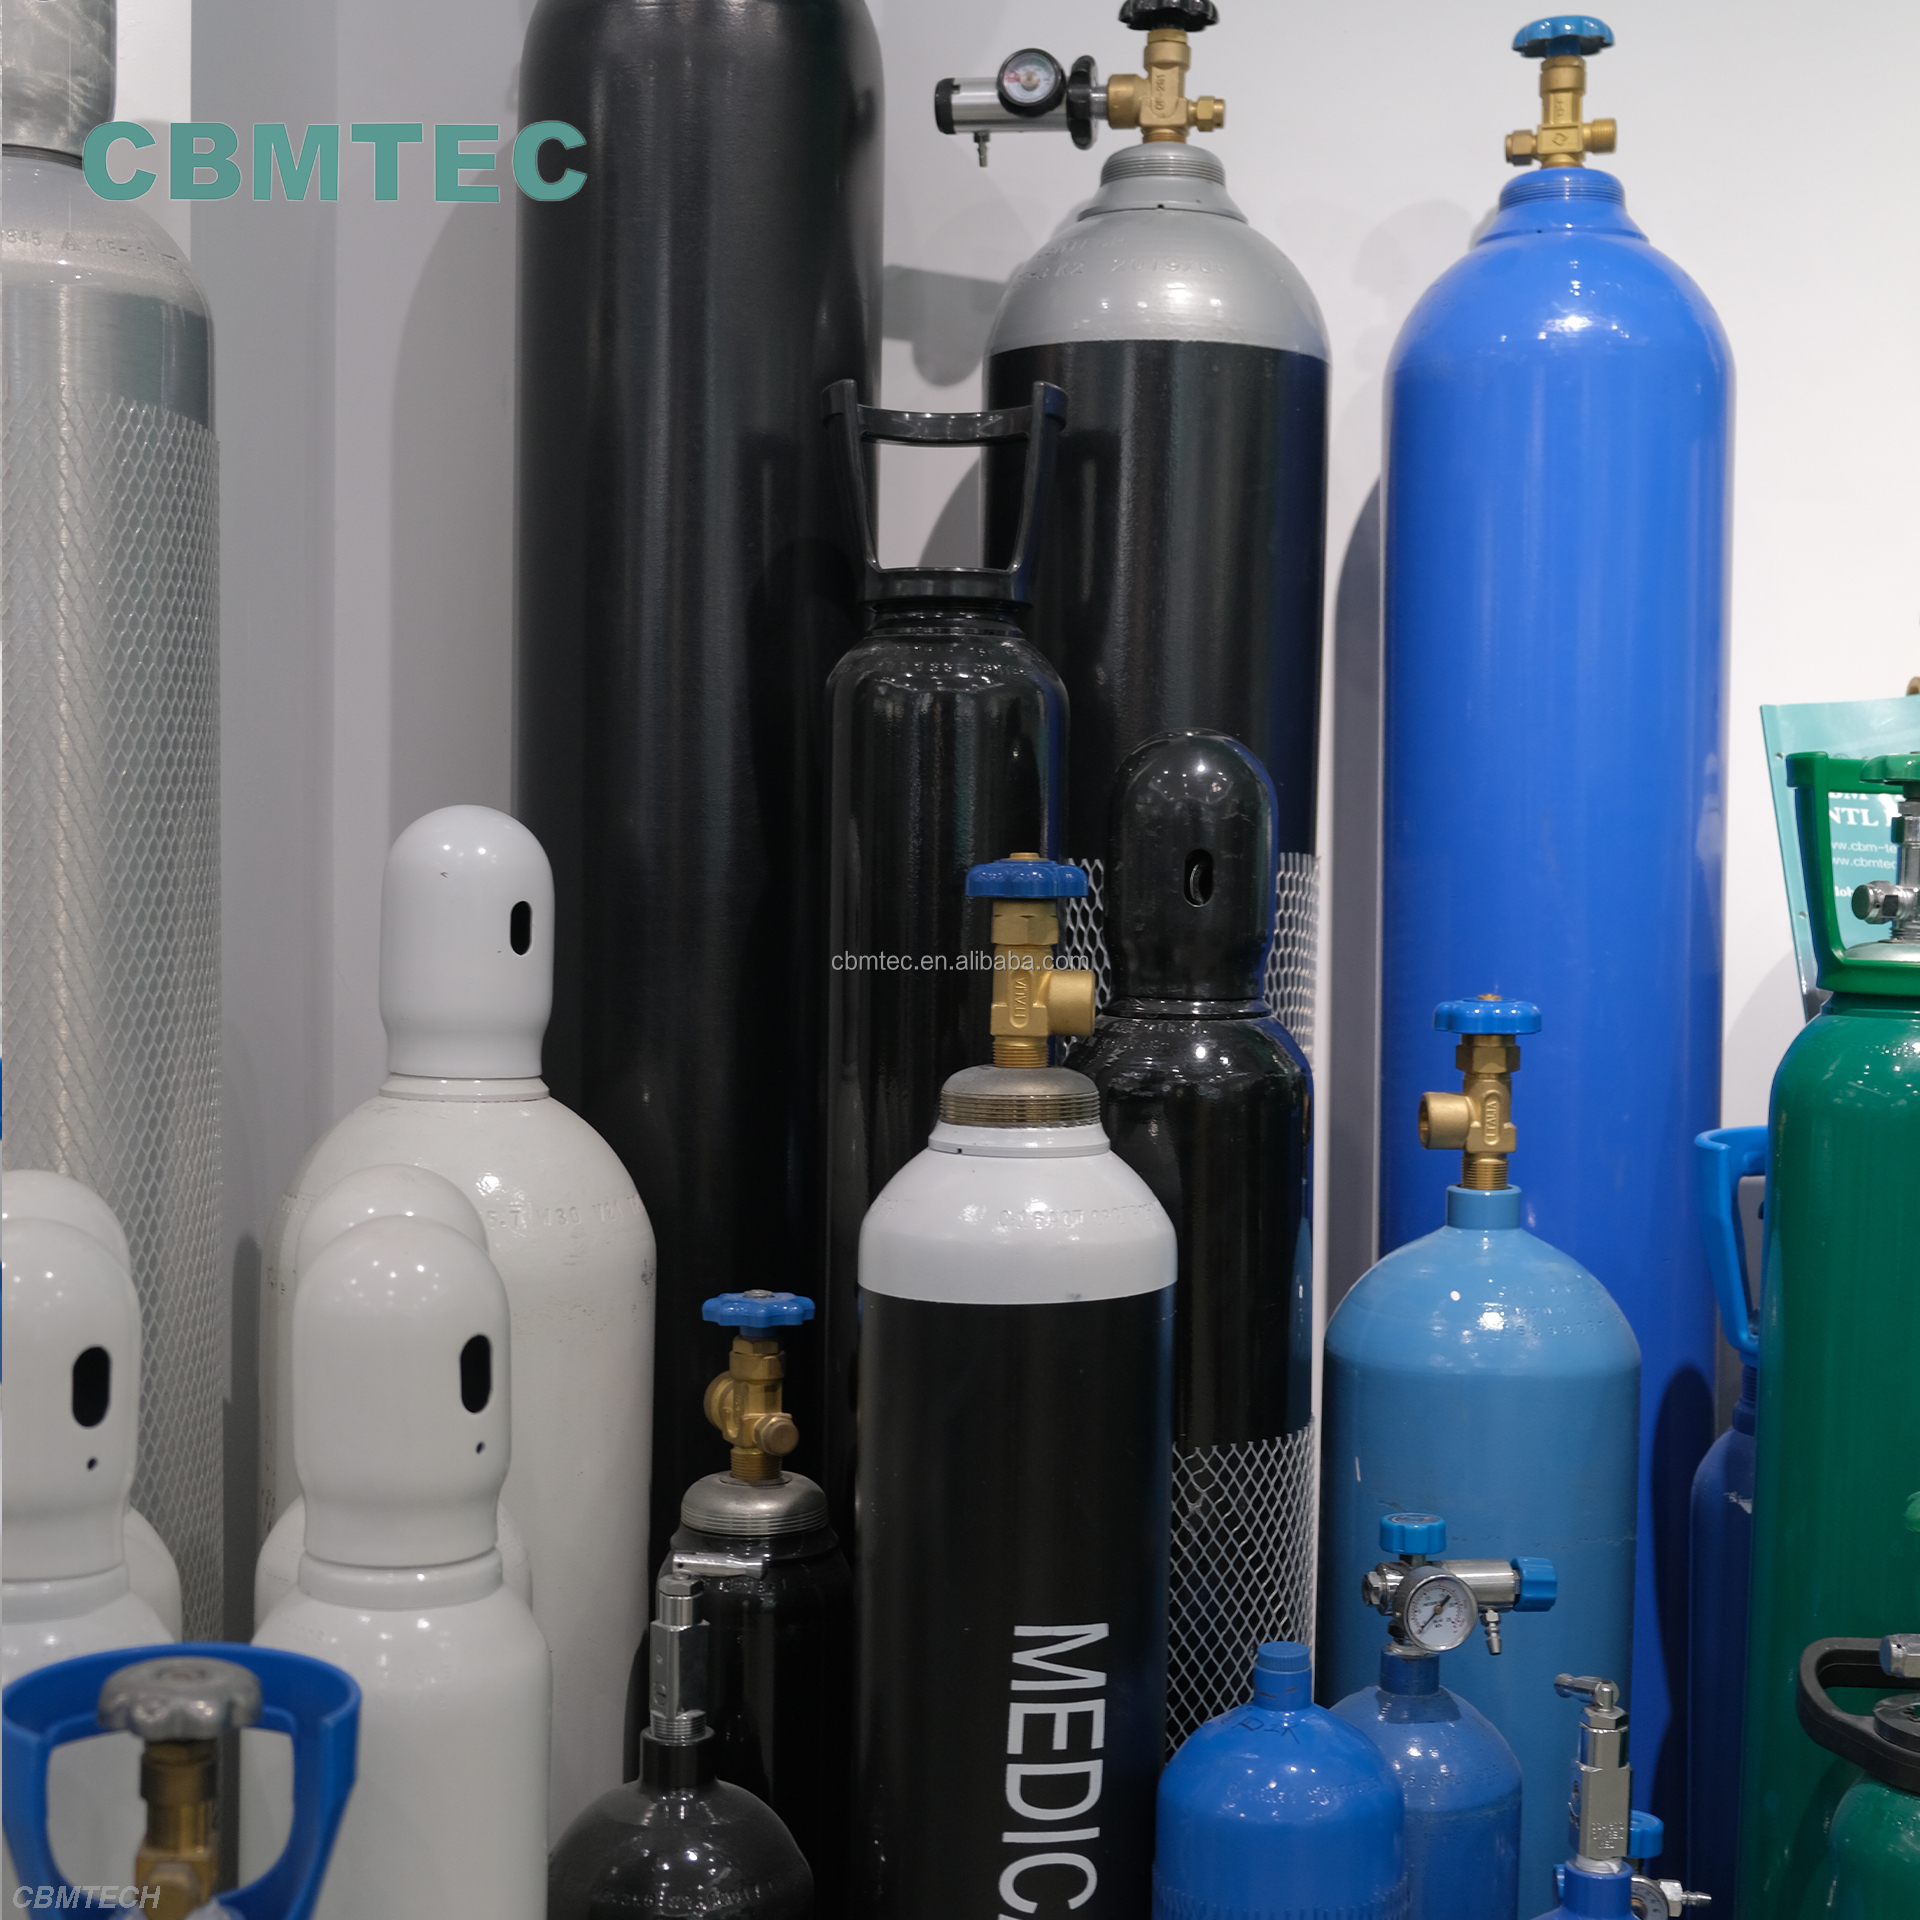 40L O2 Gas Cylinders with Valve Guards